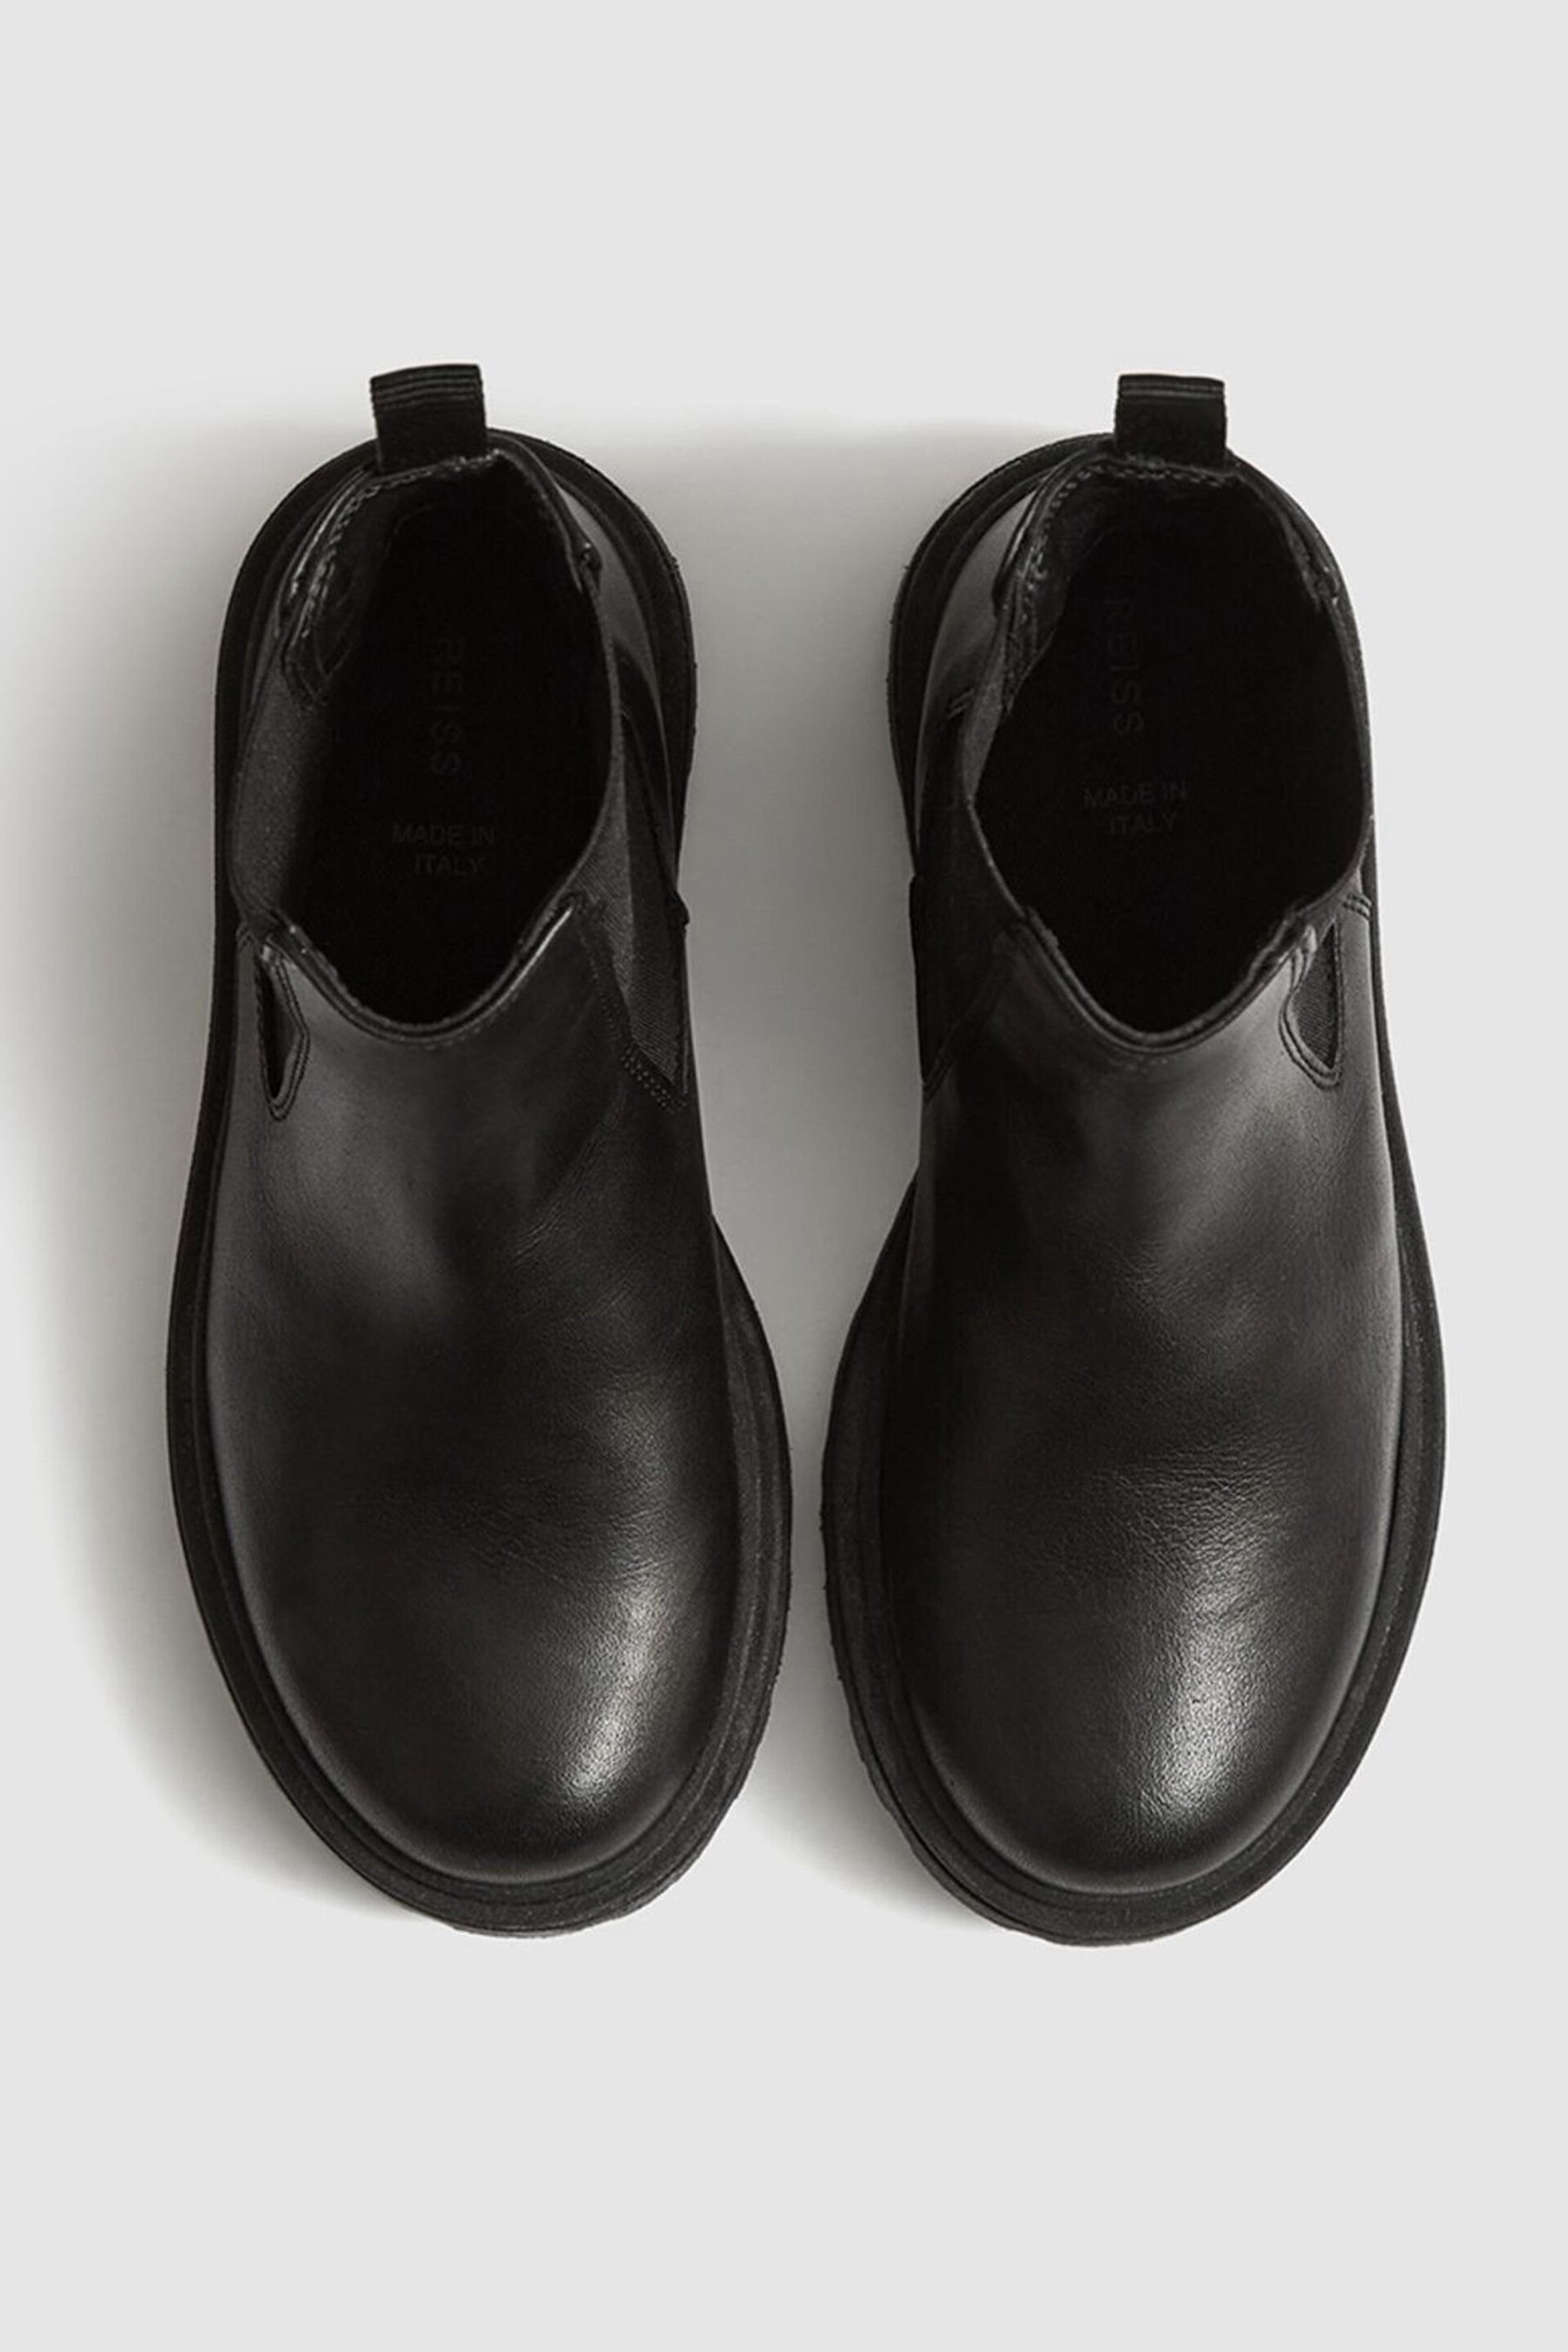 Reiss Black Taylor Junior Leather Chelsea Boots - Image 3 of 7